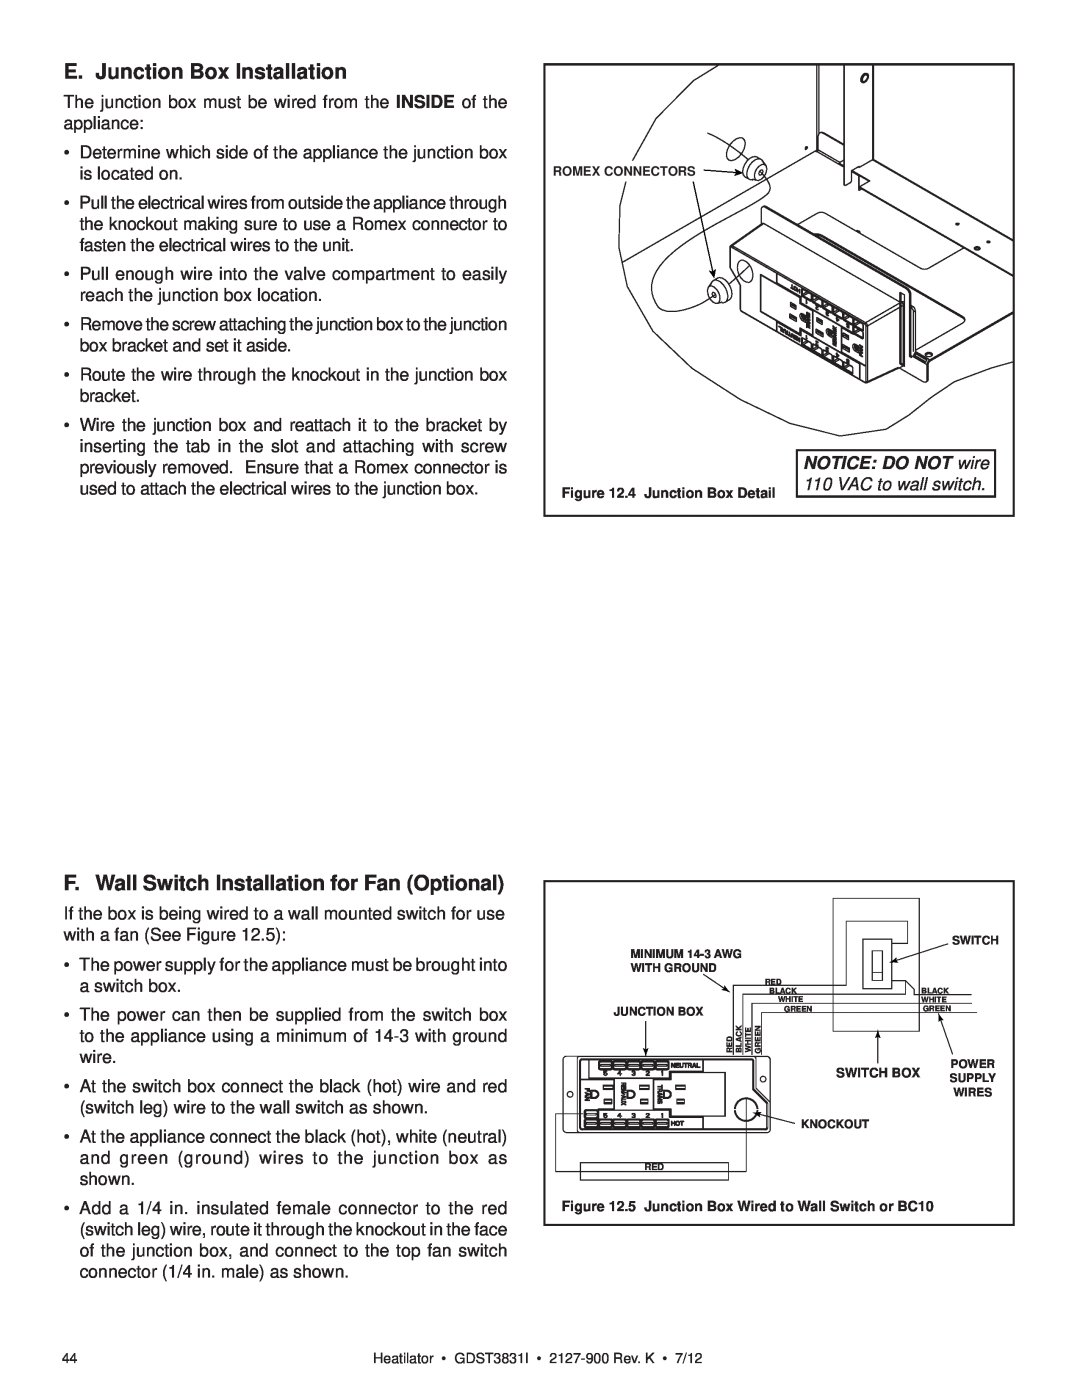 Heatiator GDST3831I E. Junction Box Installation, F. Wall Switch Installation for Fan Optional, NOTICE DO NOT wire 